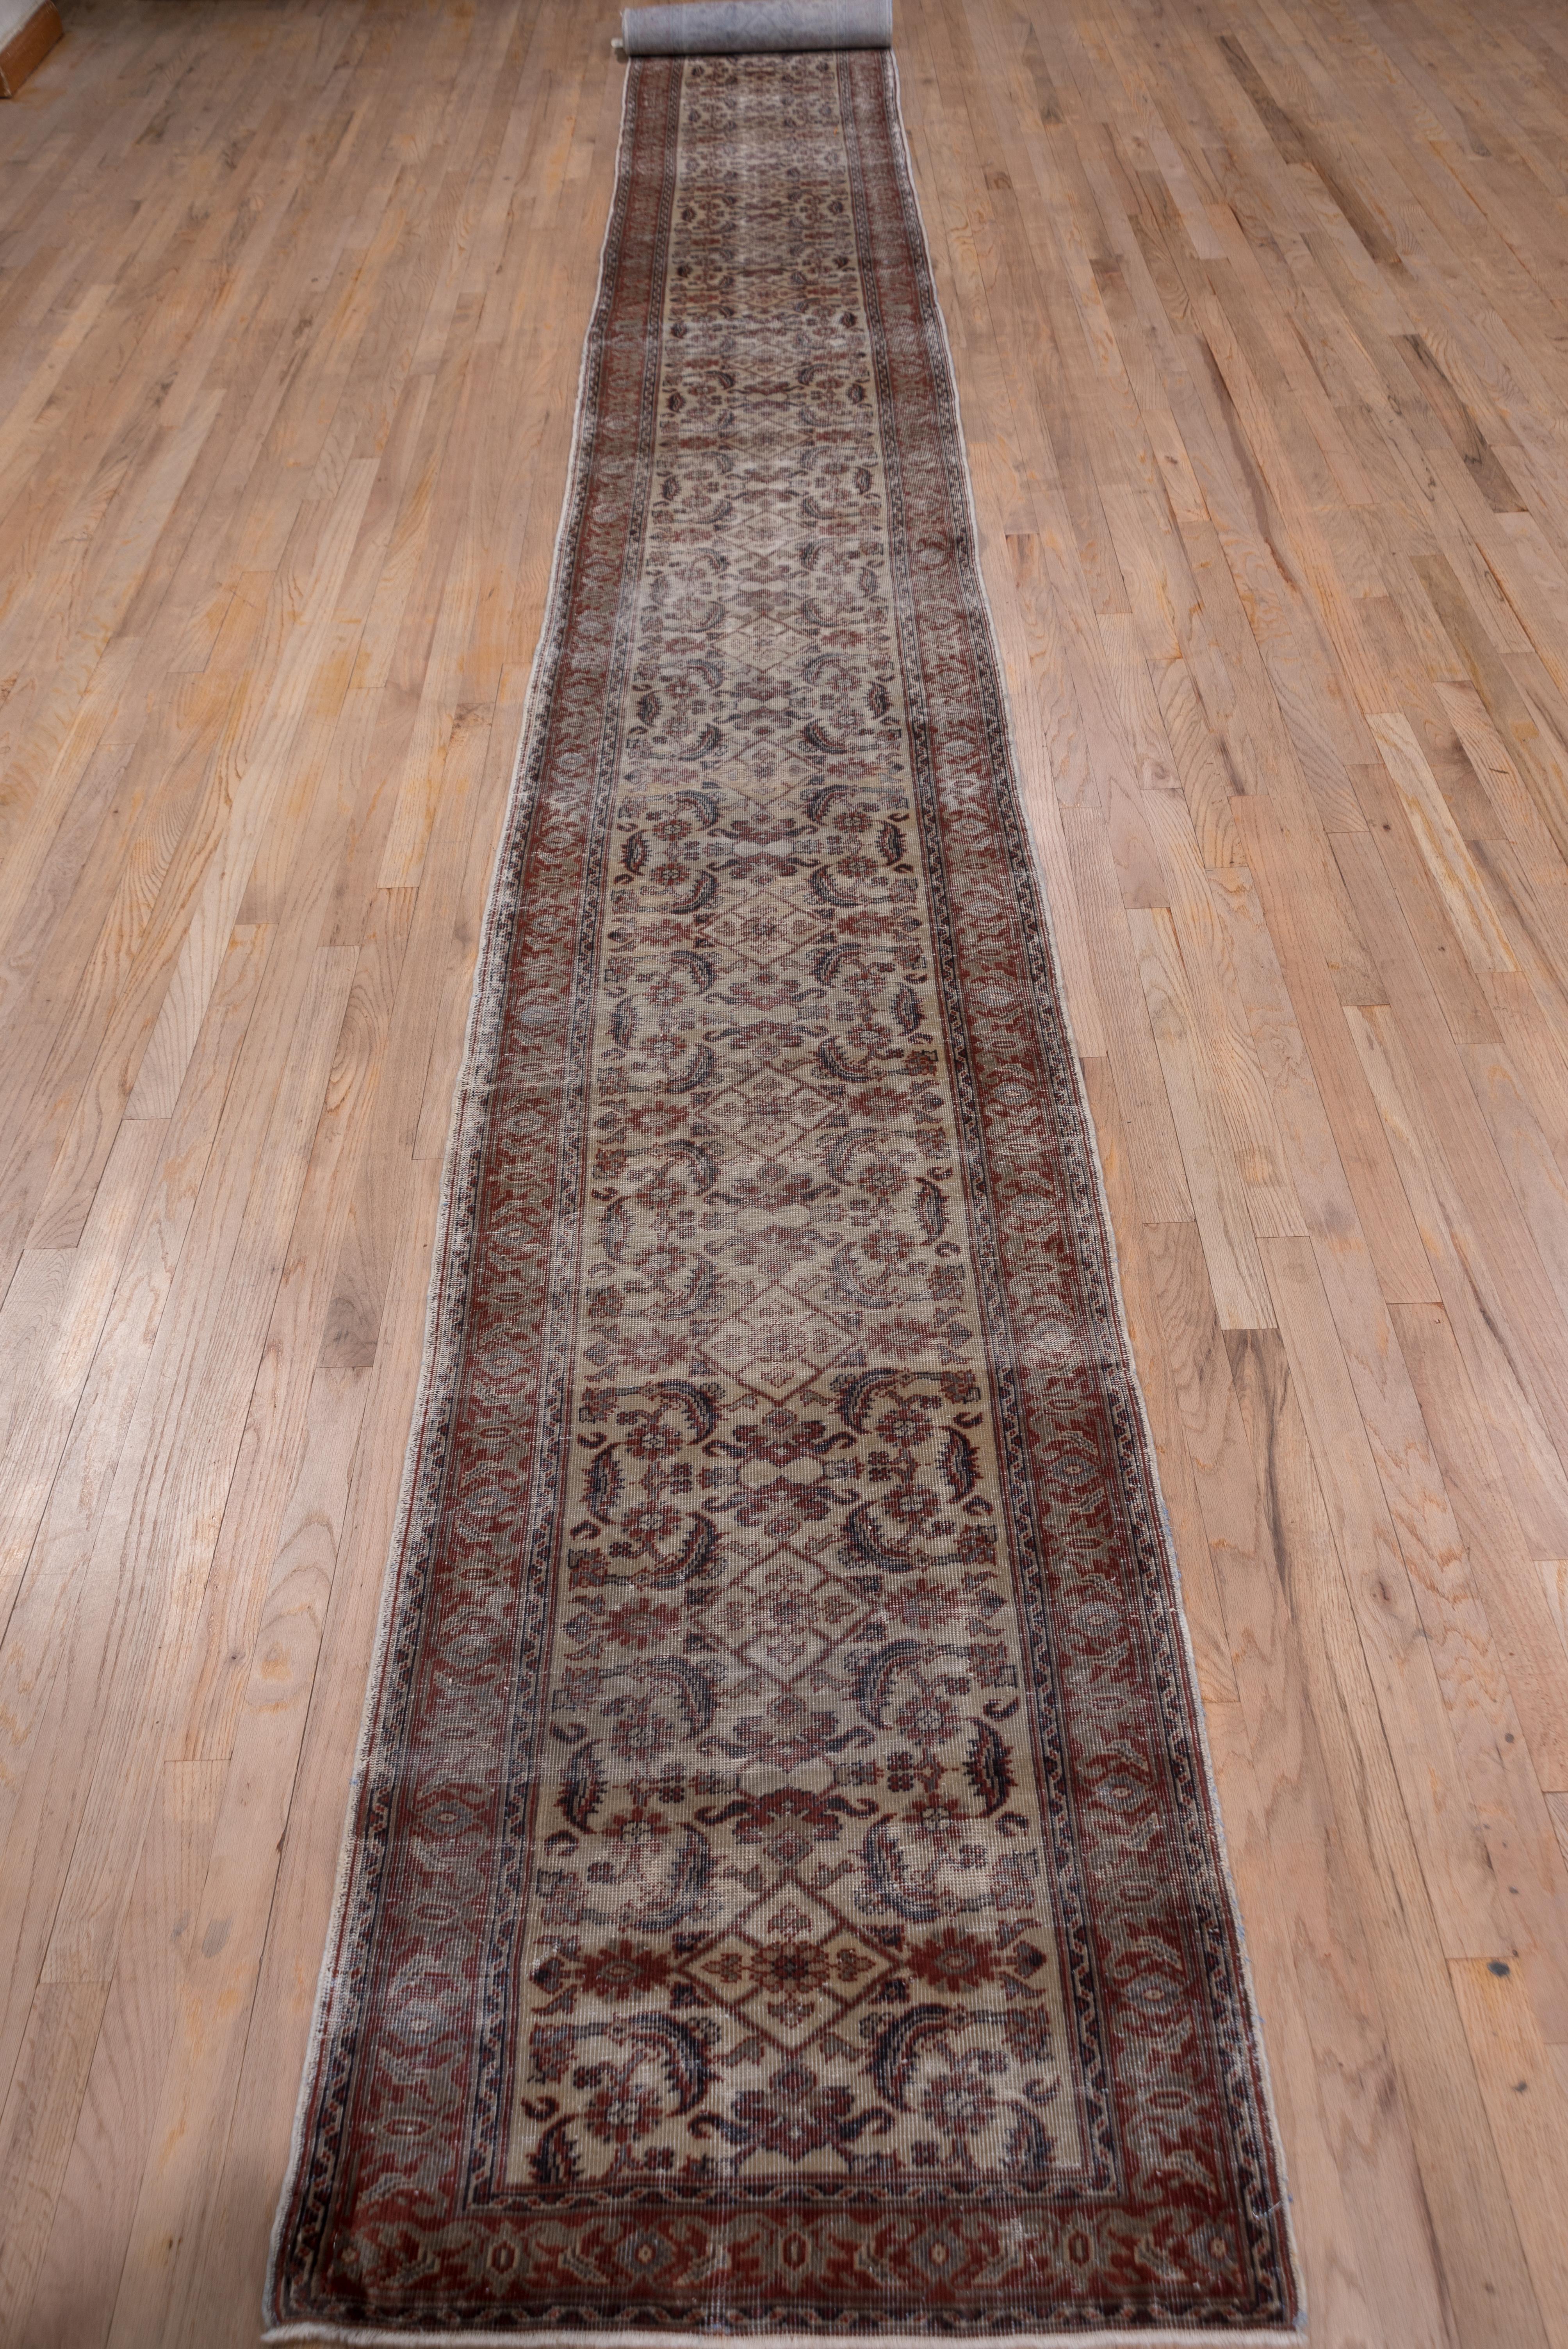 This rather distressed eastern Turkish sandy ivory ground narrow runner features a single column Persian Herati design with open diamonds, rosettes and 'fish' leaves. The brown border shows thick split leaves and geometric palmettes.